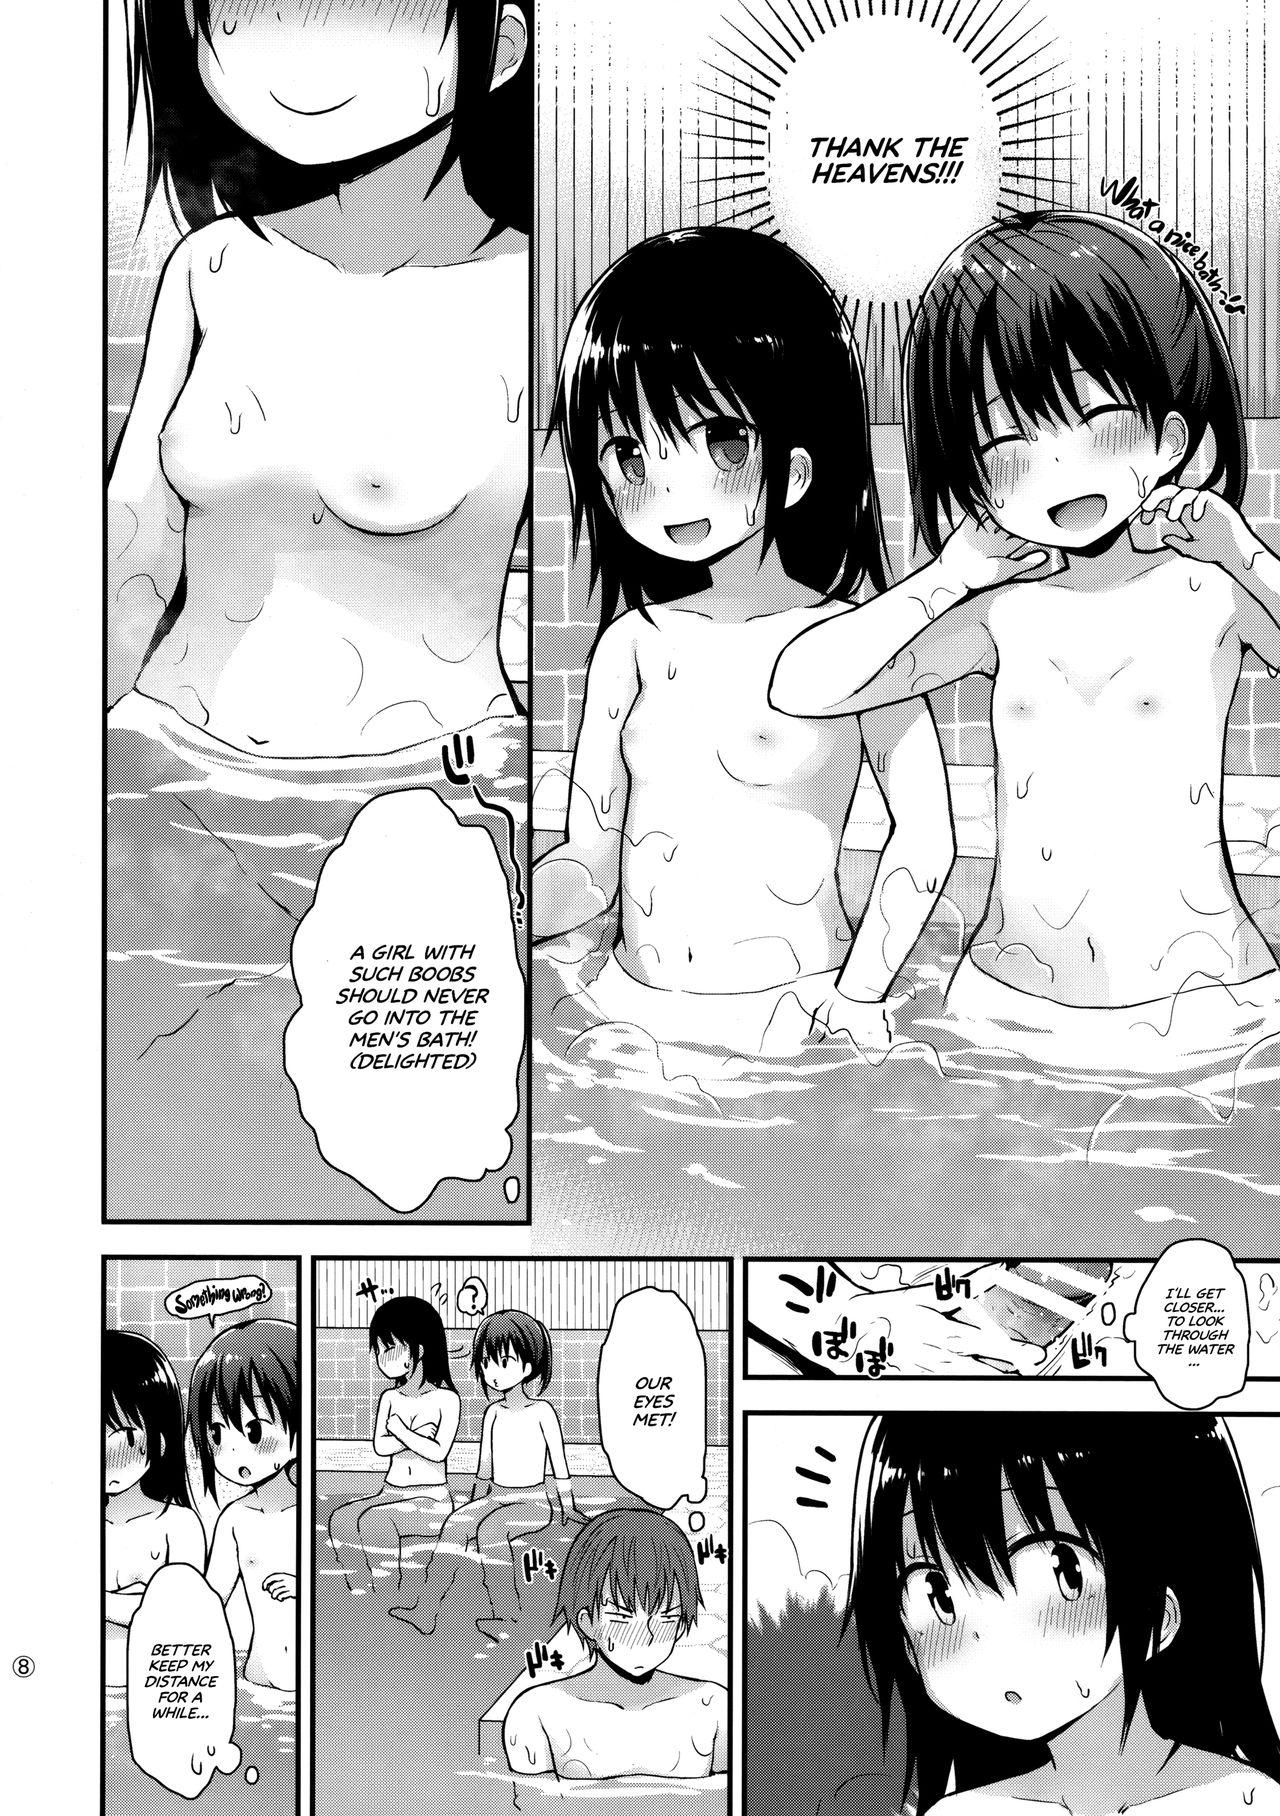 Onnanoko datte Otokoyu ni Hairitai | They may just be little girls, but they still want to enter the men's bath! 7